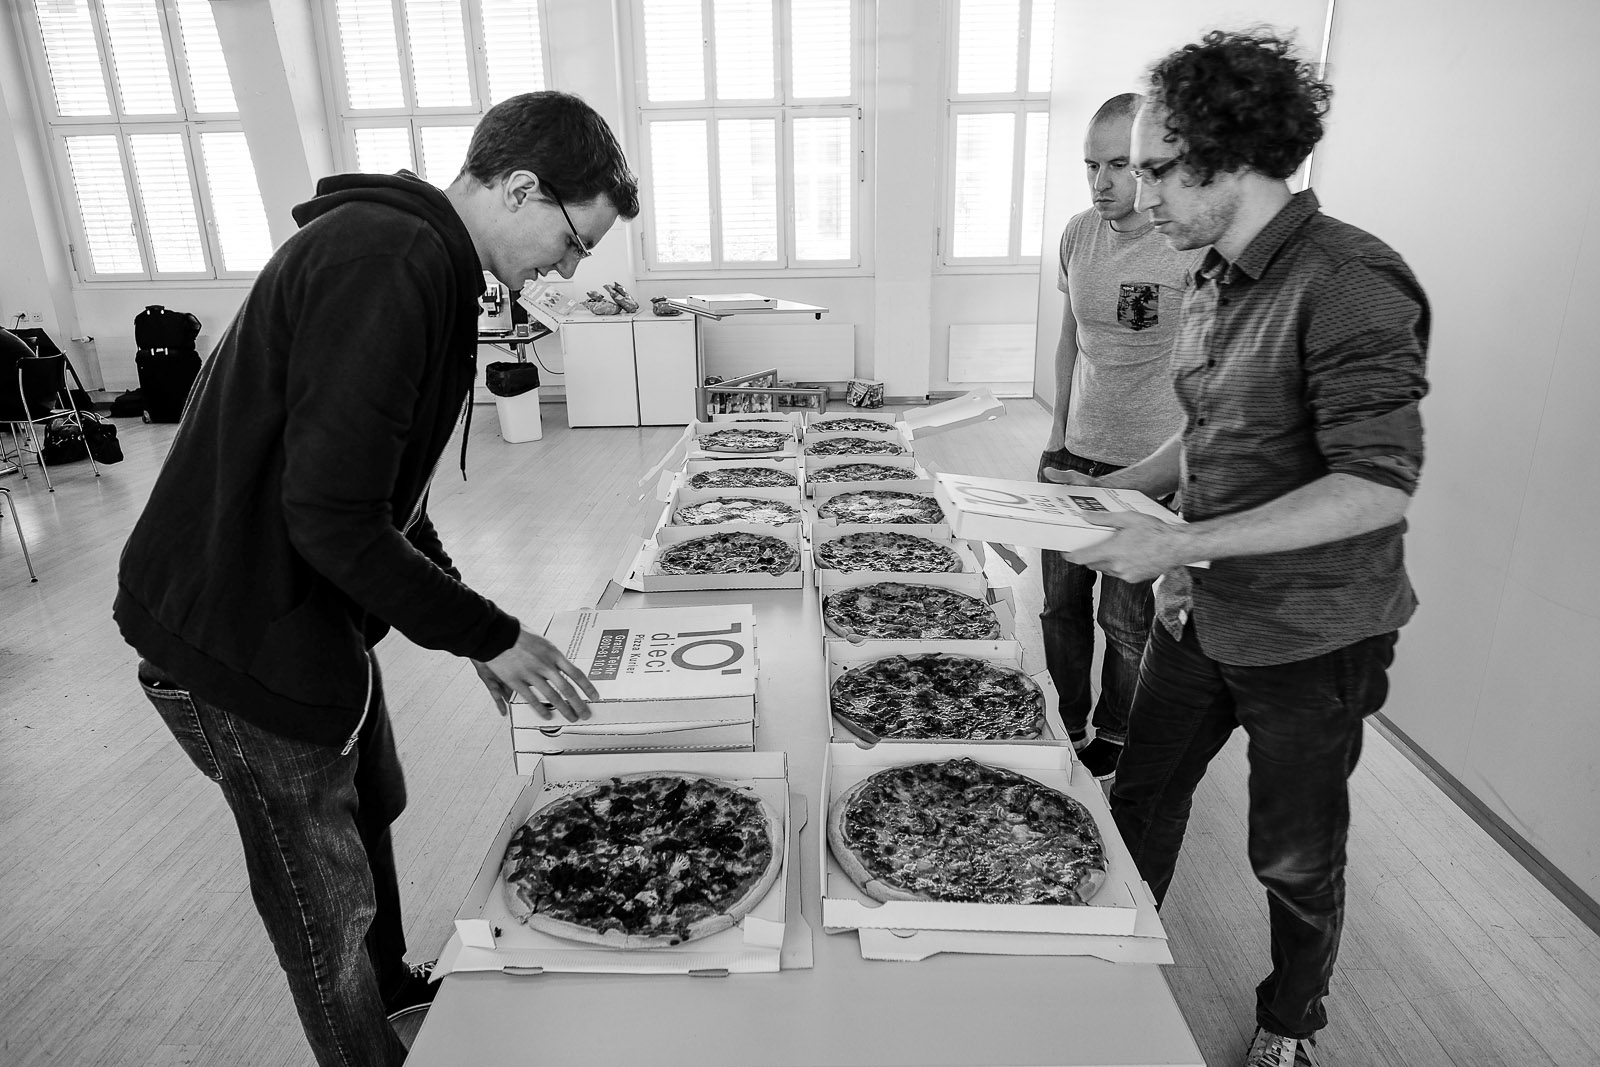 20 Pizzas to feed the hungry developers at Contributer's day of wcch